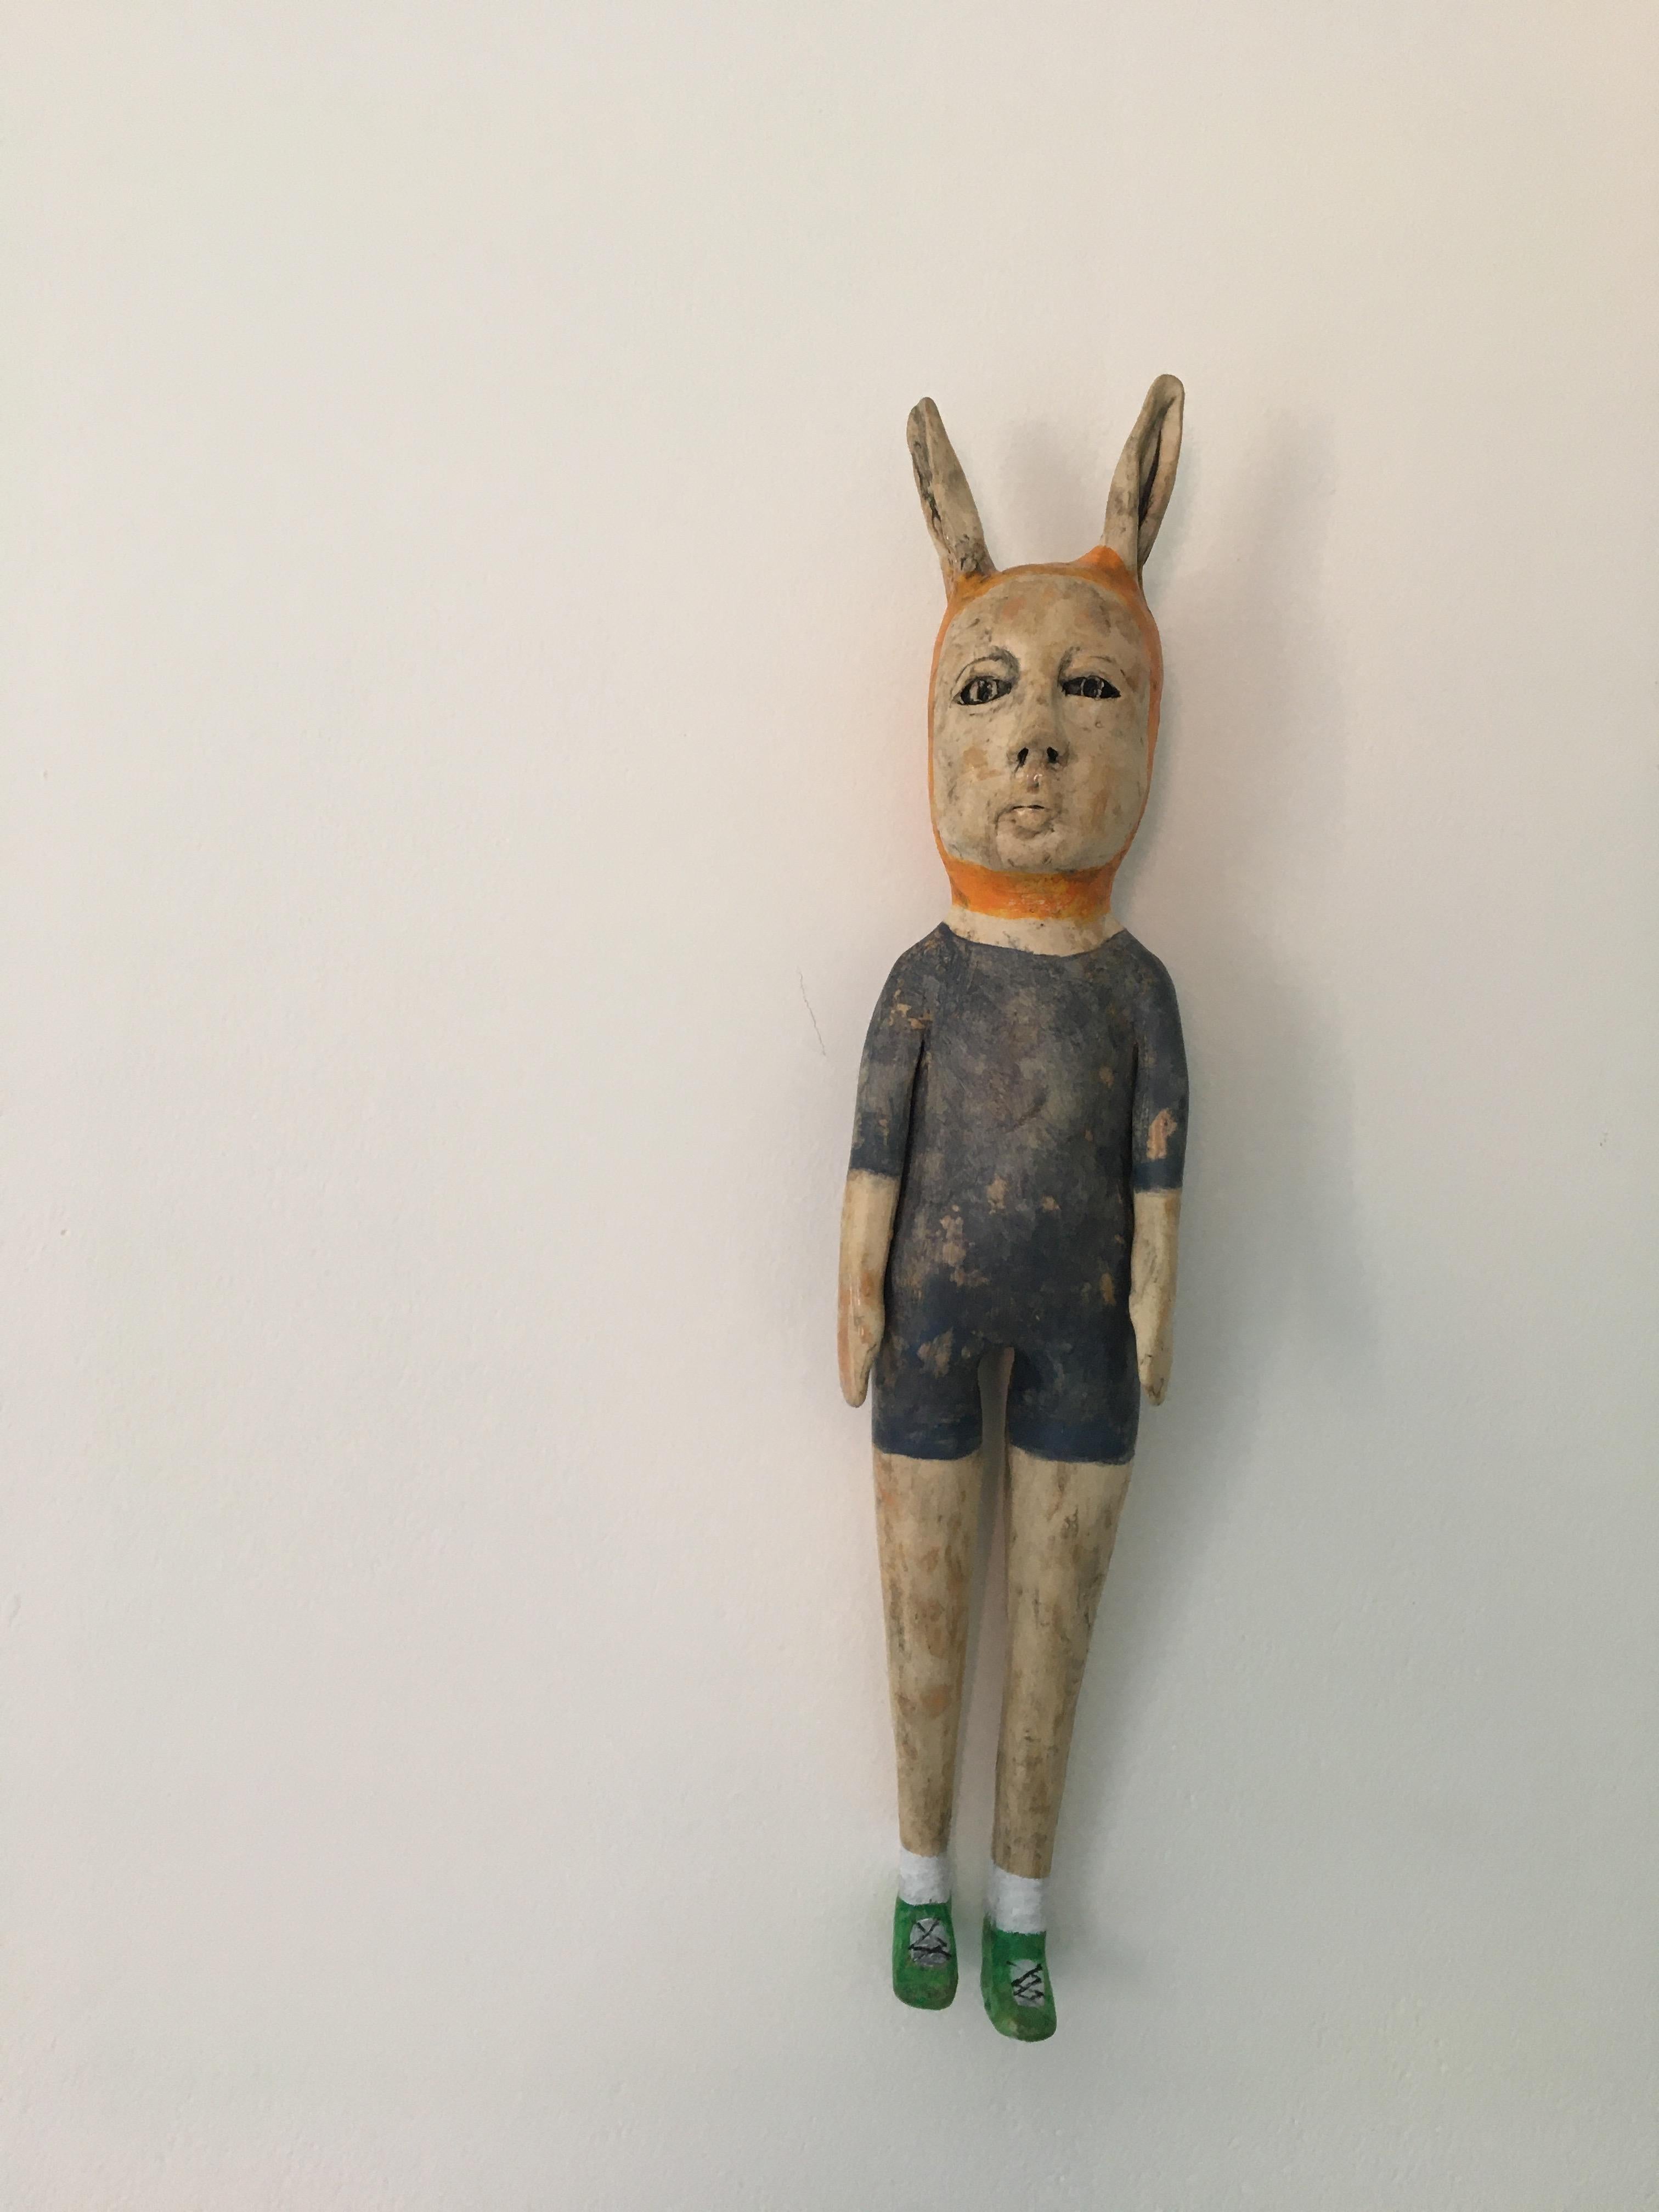 Ashley Benton Figurative Sculpture - Ceramic wall hanging: 'In 6th grade I got a pair of Nikes that were fast'